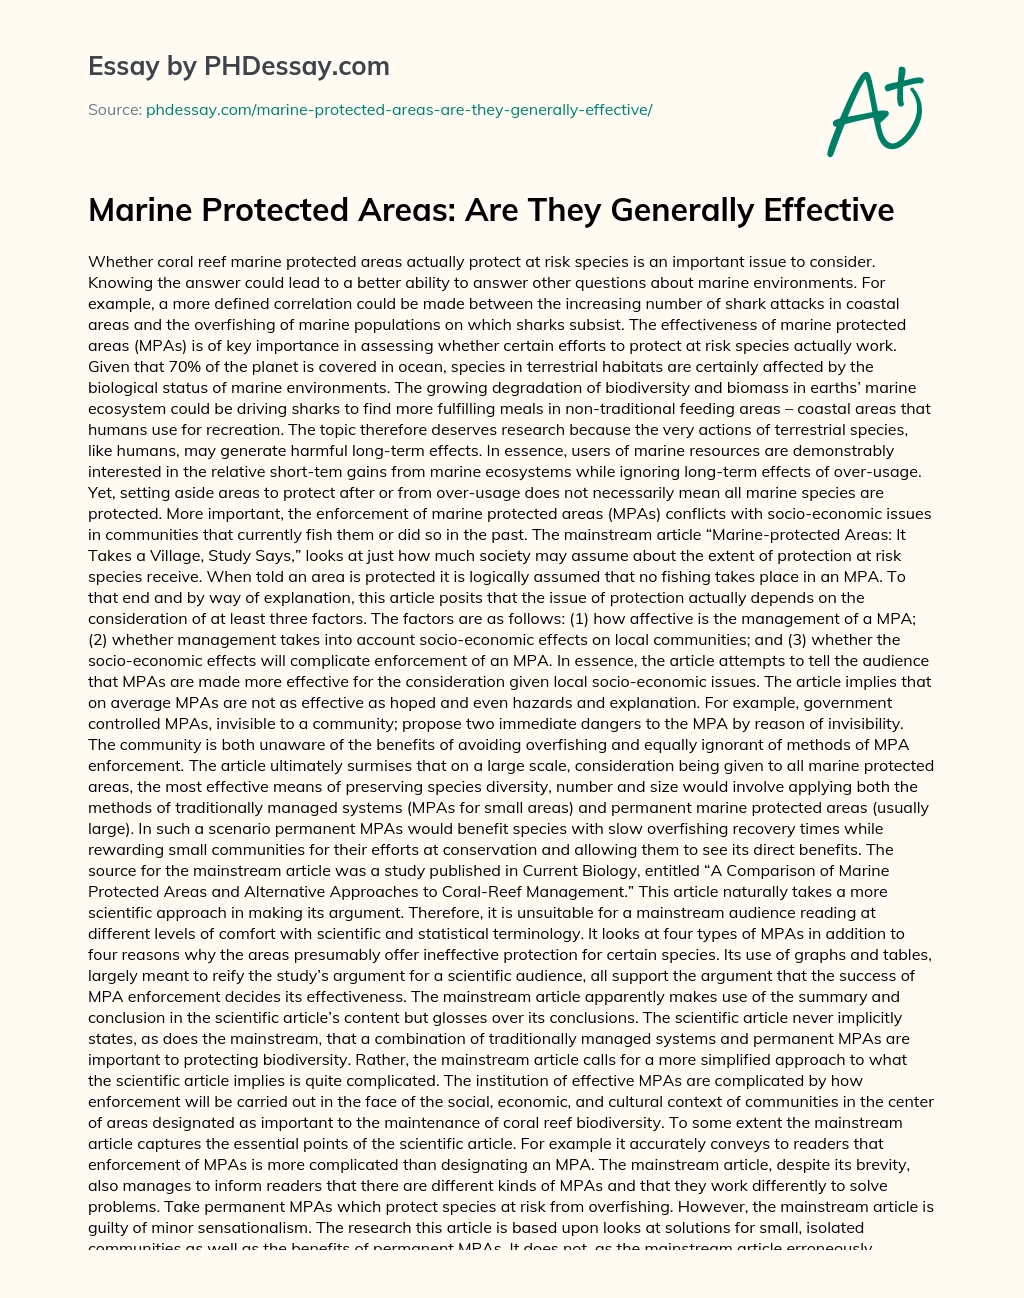 Marine Protected Areas: Are They Generally Effective essay